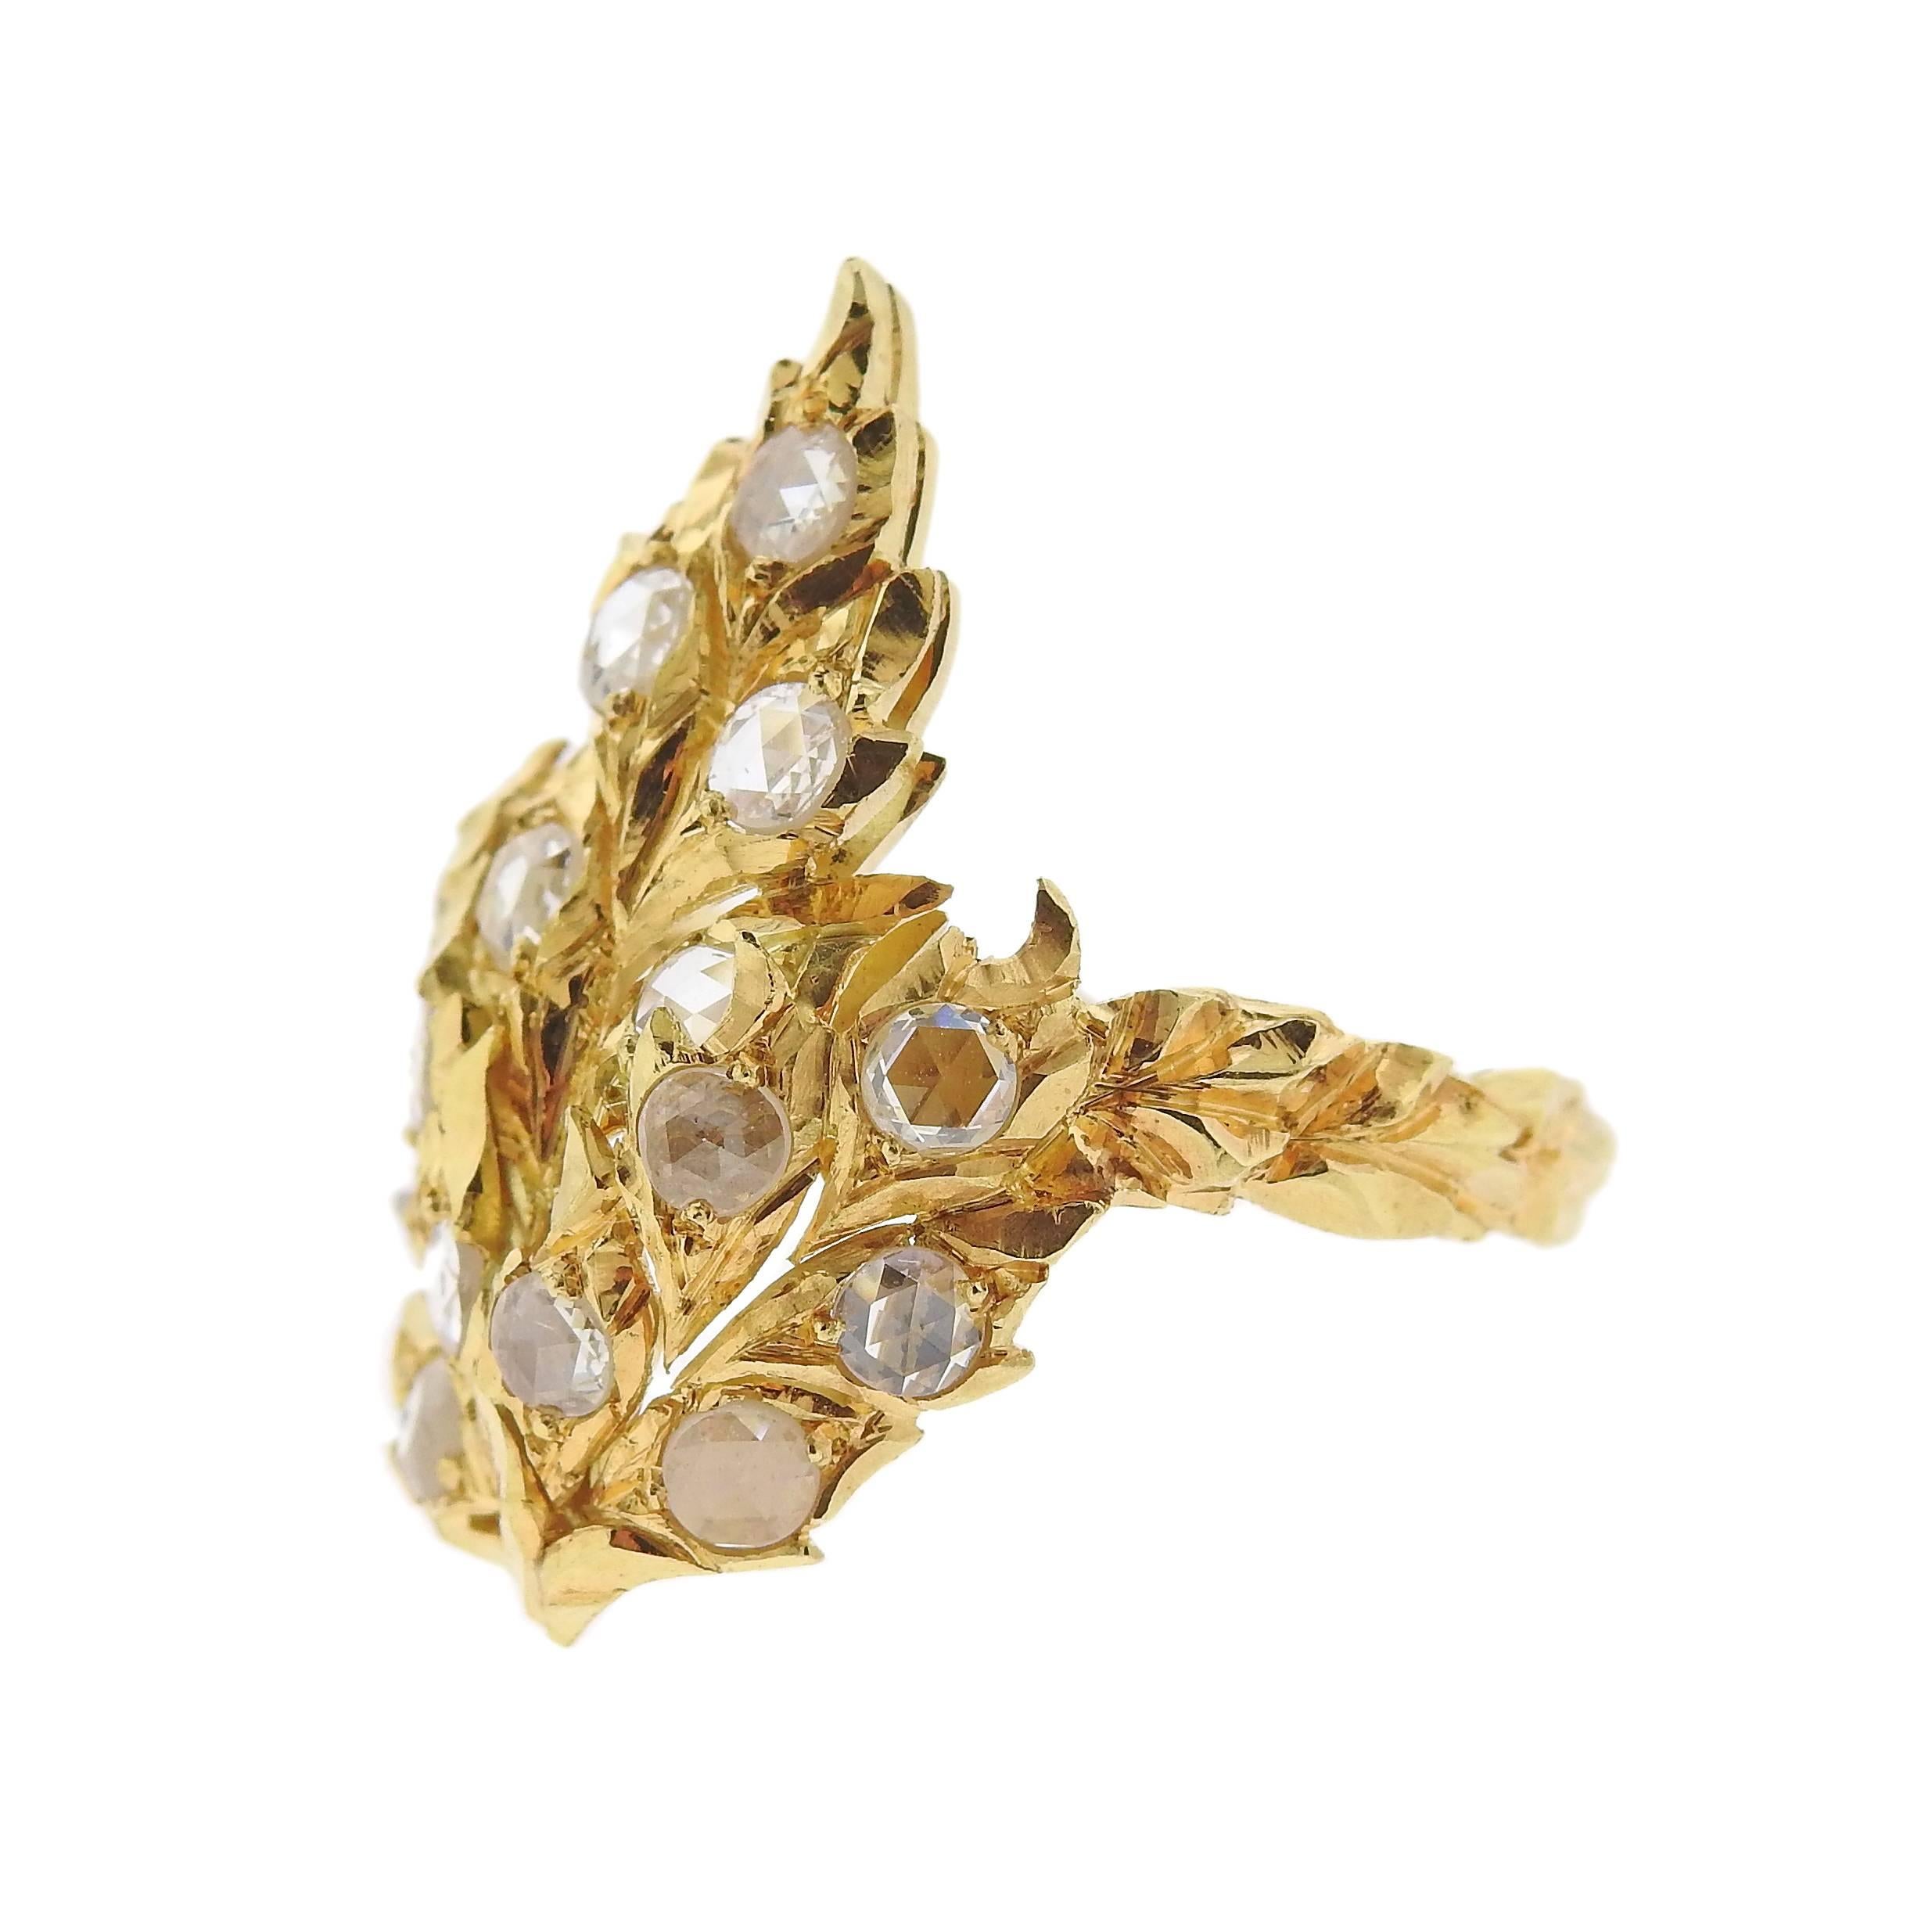 An 18k yellow gold ring, crafted by Buccellati, featuring leaf motif, decorated with rose cut diamonds. Ring size - 7, ring top is 26mm x 18mm. Marked: V1922, Buccellati, Italy, 18k, 750. Weight - 7 grams.
Comes with pouch. Retail $29500.
